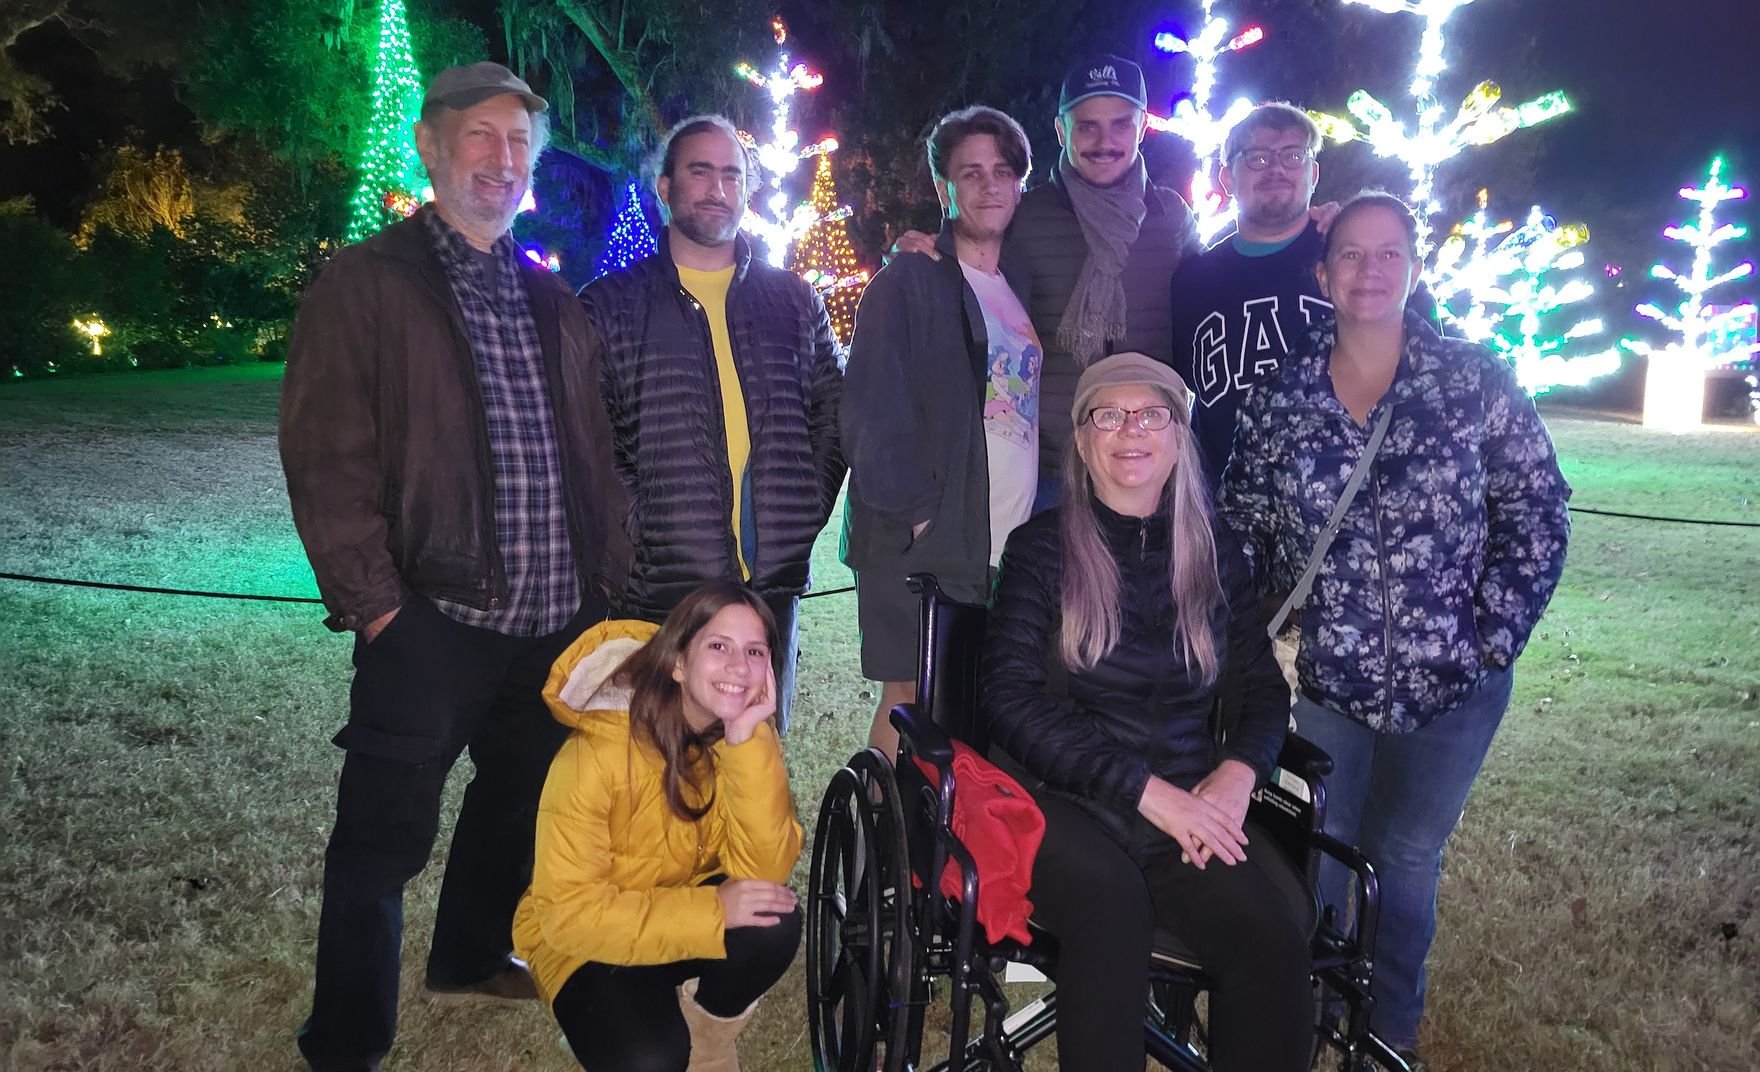 group of 8 iss people in front of Christmas lights